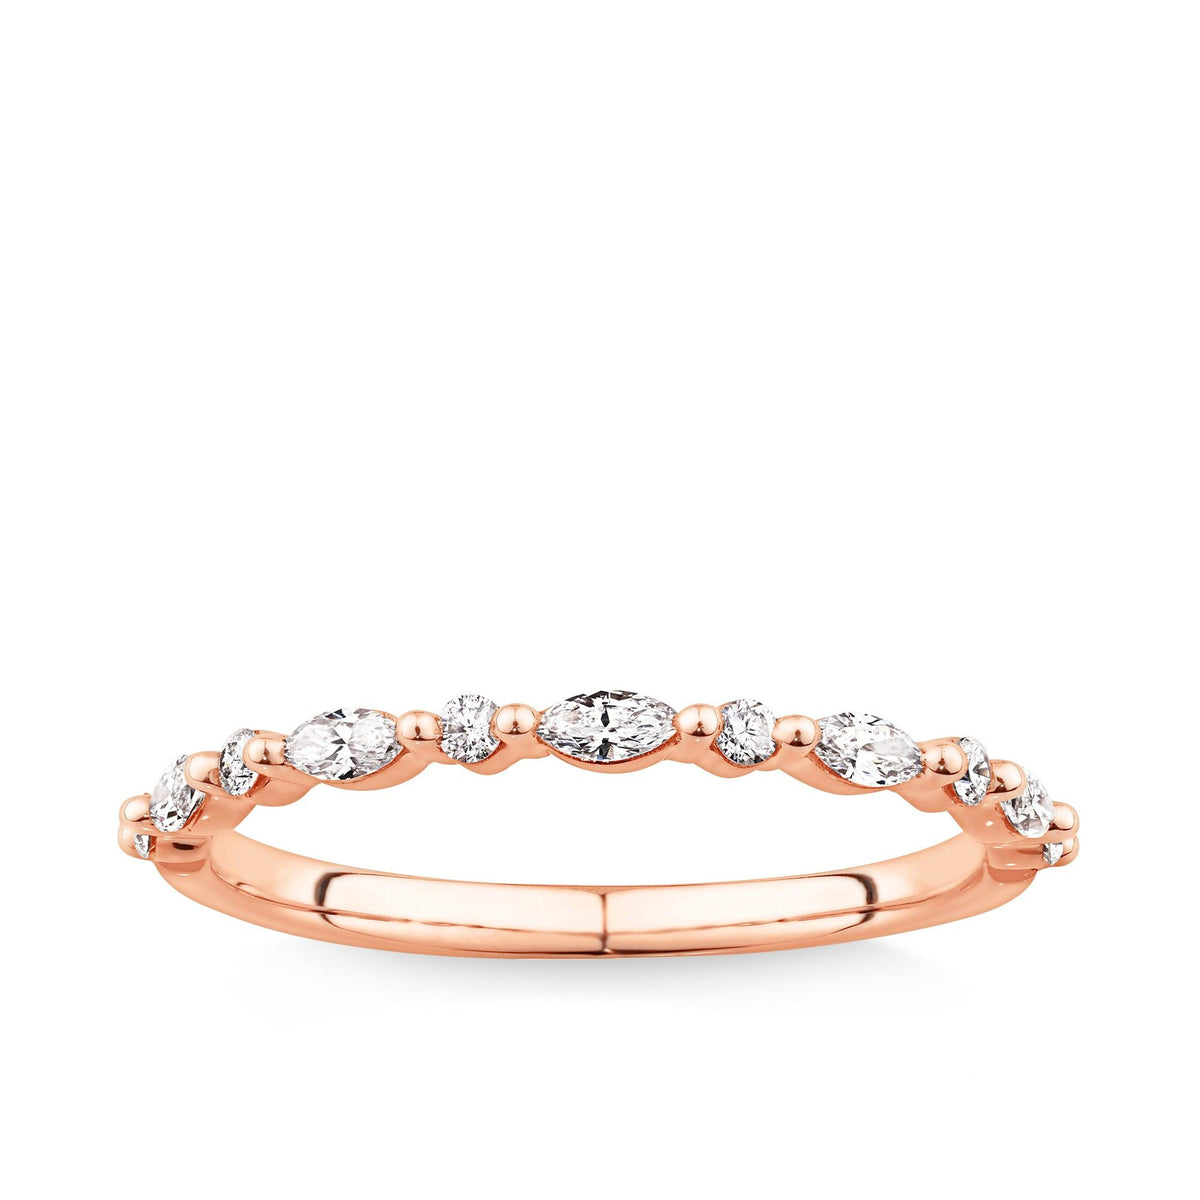 0.25ct TW Diamond Band in 9ct Rose Gold - Wallace Bishop